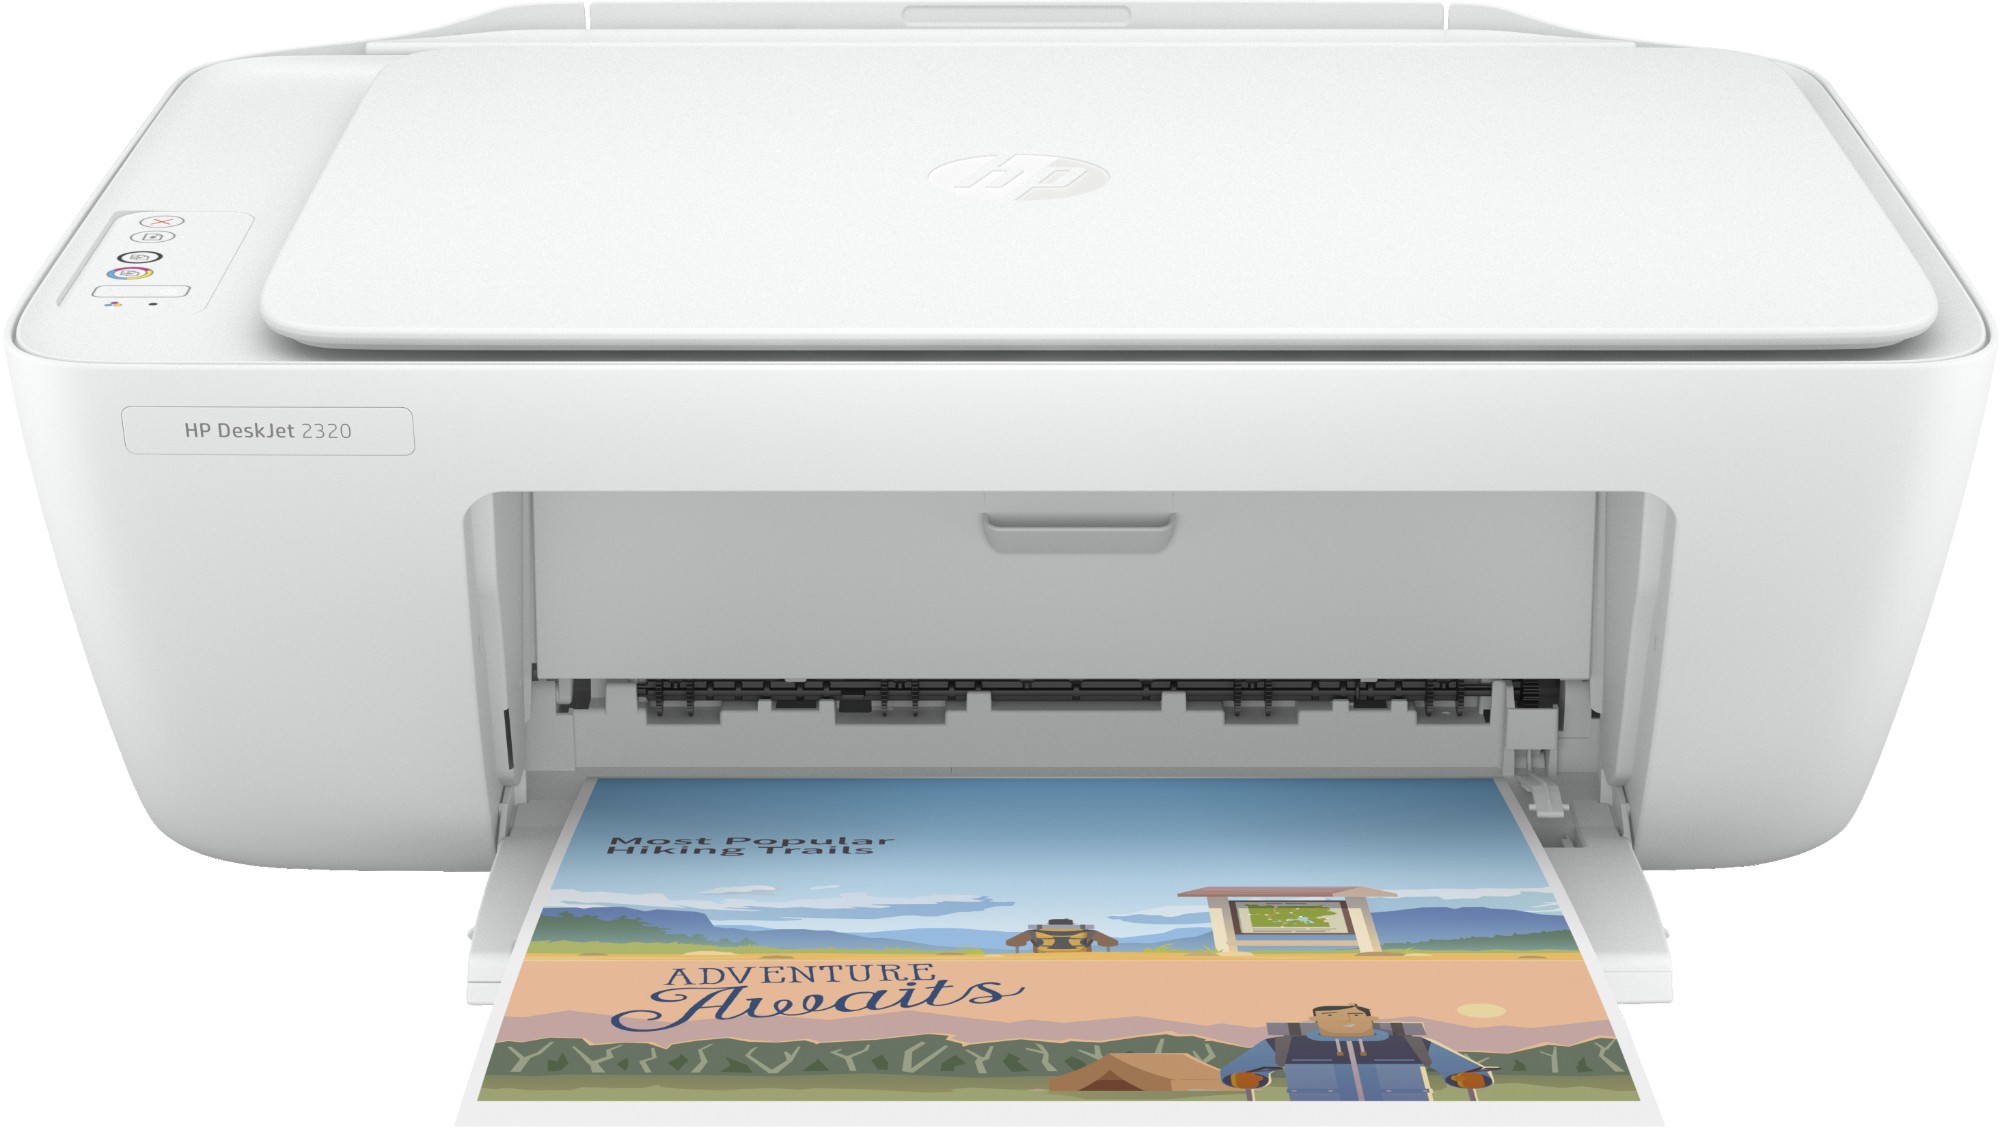 7WN42B HP DeskJet 2320 All-in-One Printer - Color - Printer for Home - Print - copy - scan - Scan to PDF - Thermal inkjet - Colour printing - 4800 x 1200 DPI - Colour copying - A4 - White